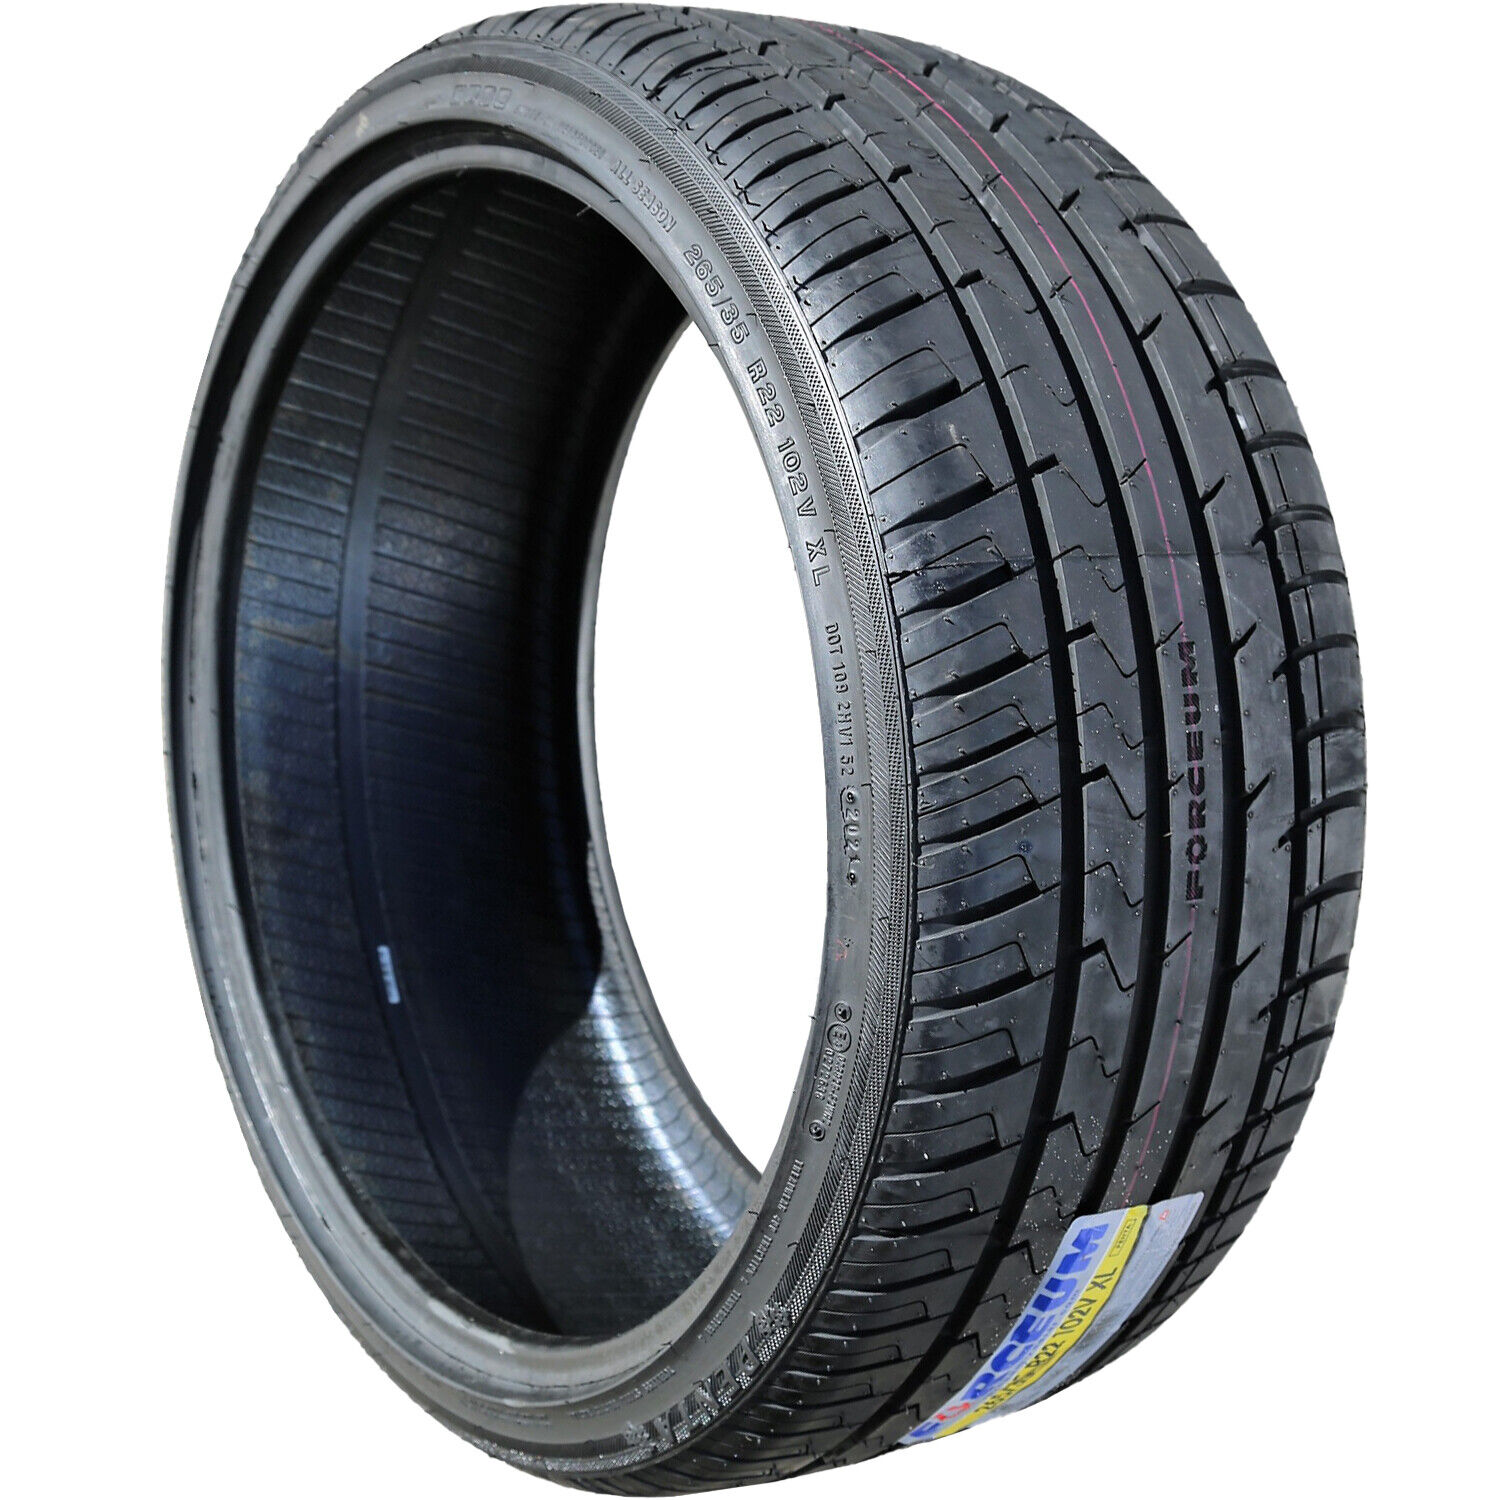 Tire Forceum Penta Steel Belted 265/35R22 102V XL A/S All Season